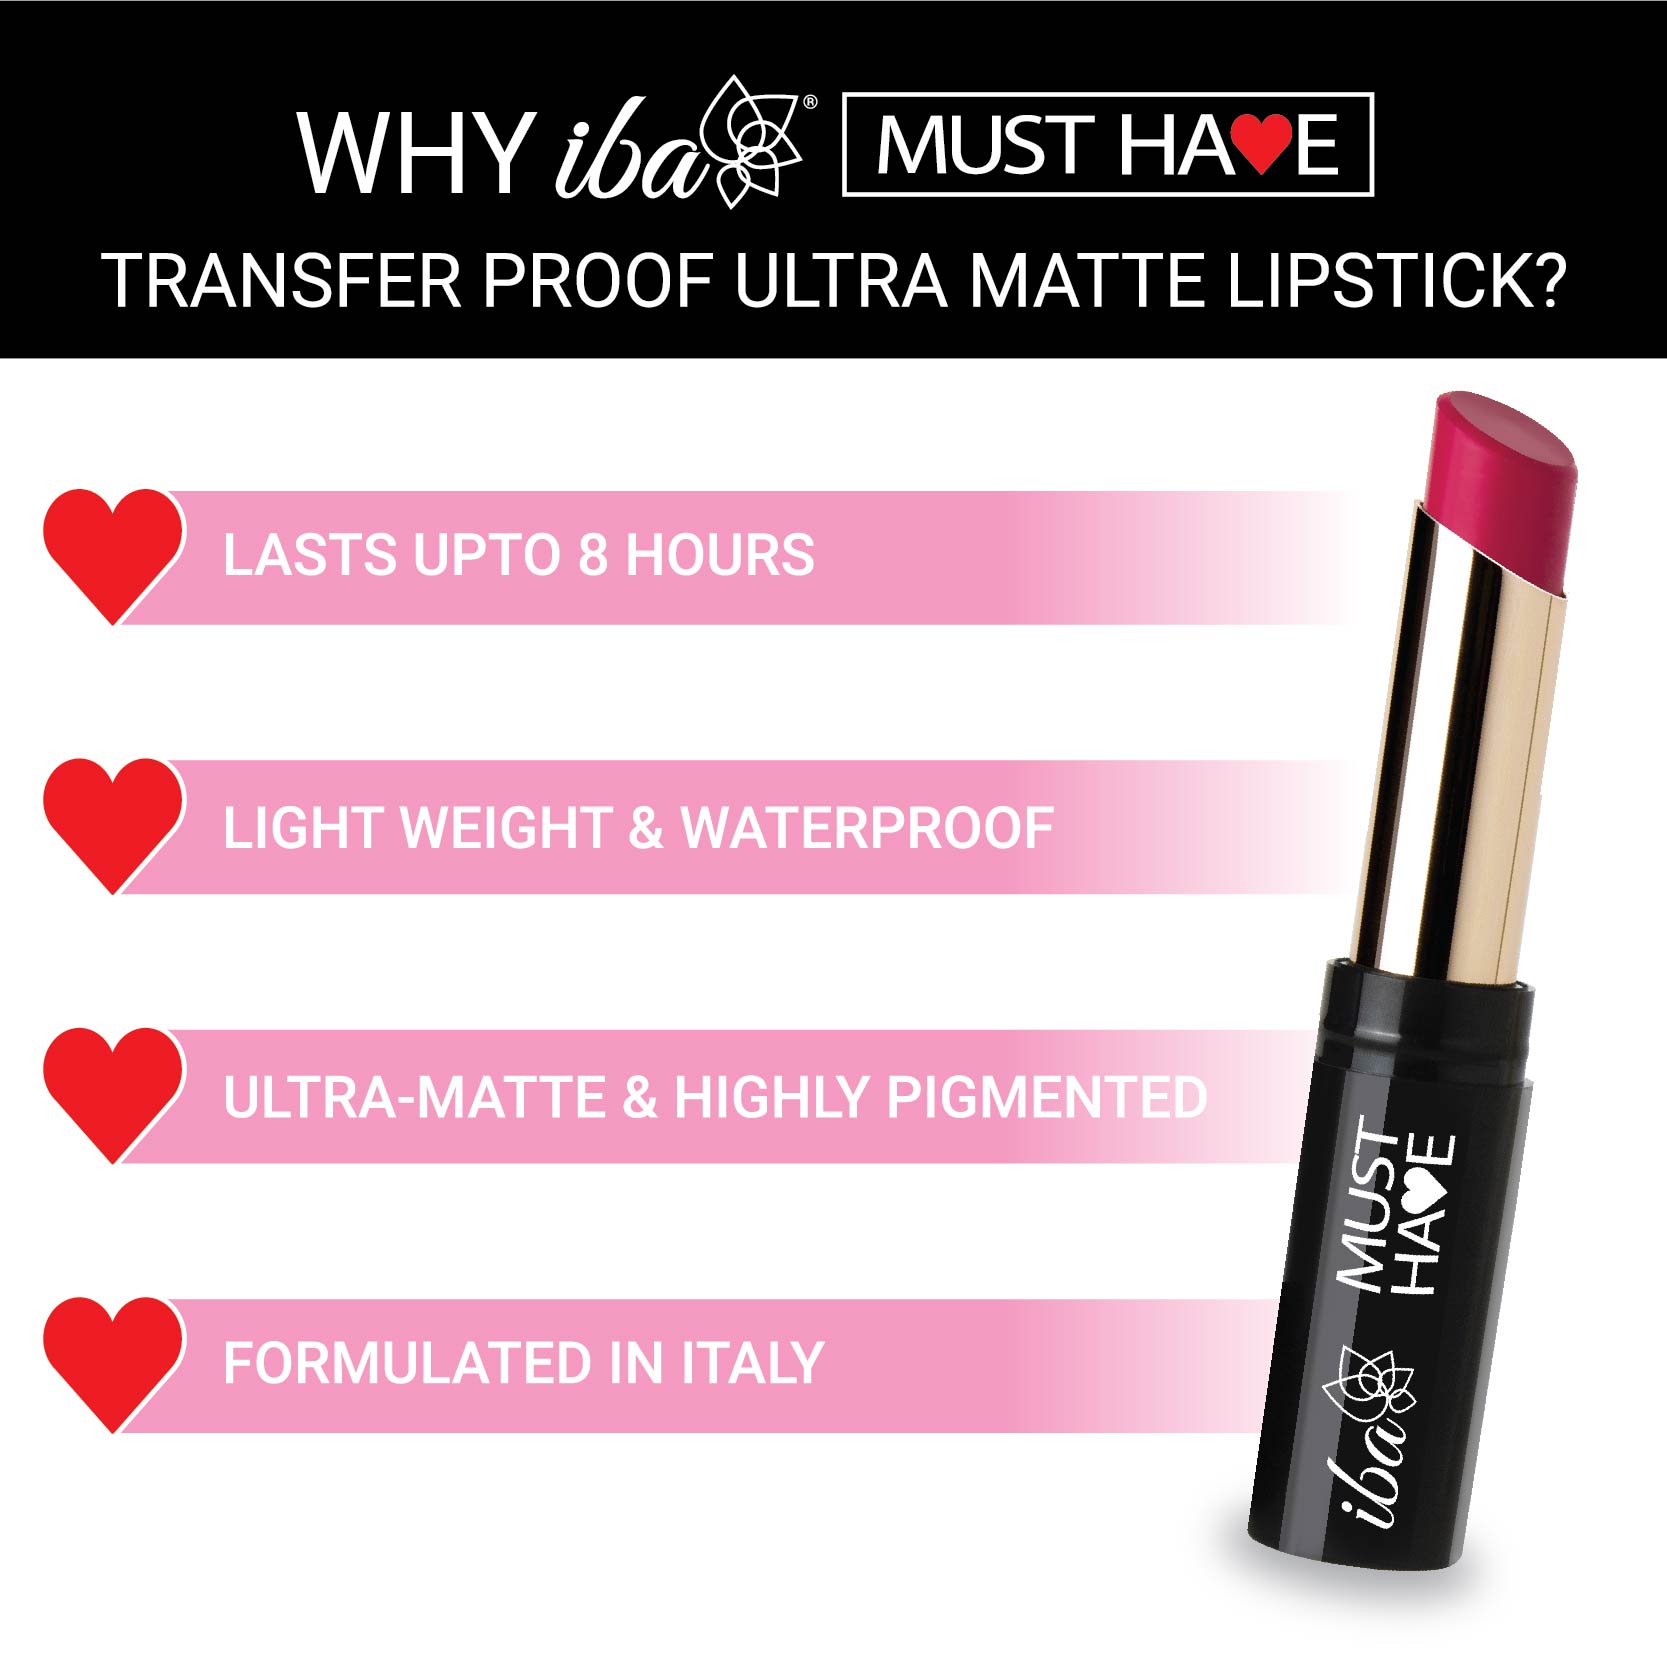 Iba Must Have Transfer Proof Ultra Matte Lipstick Features